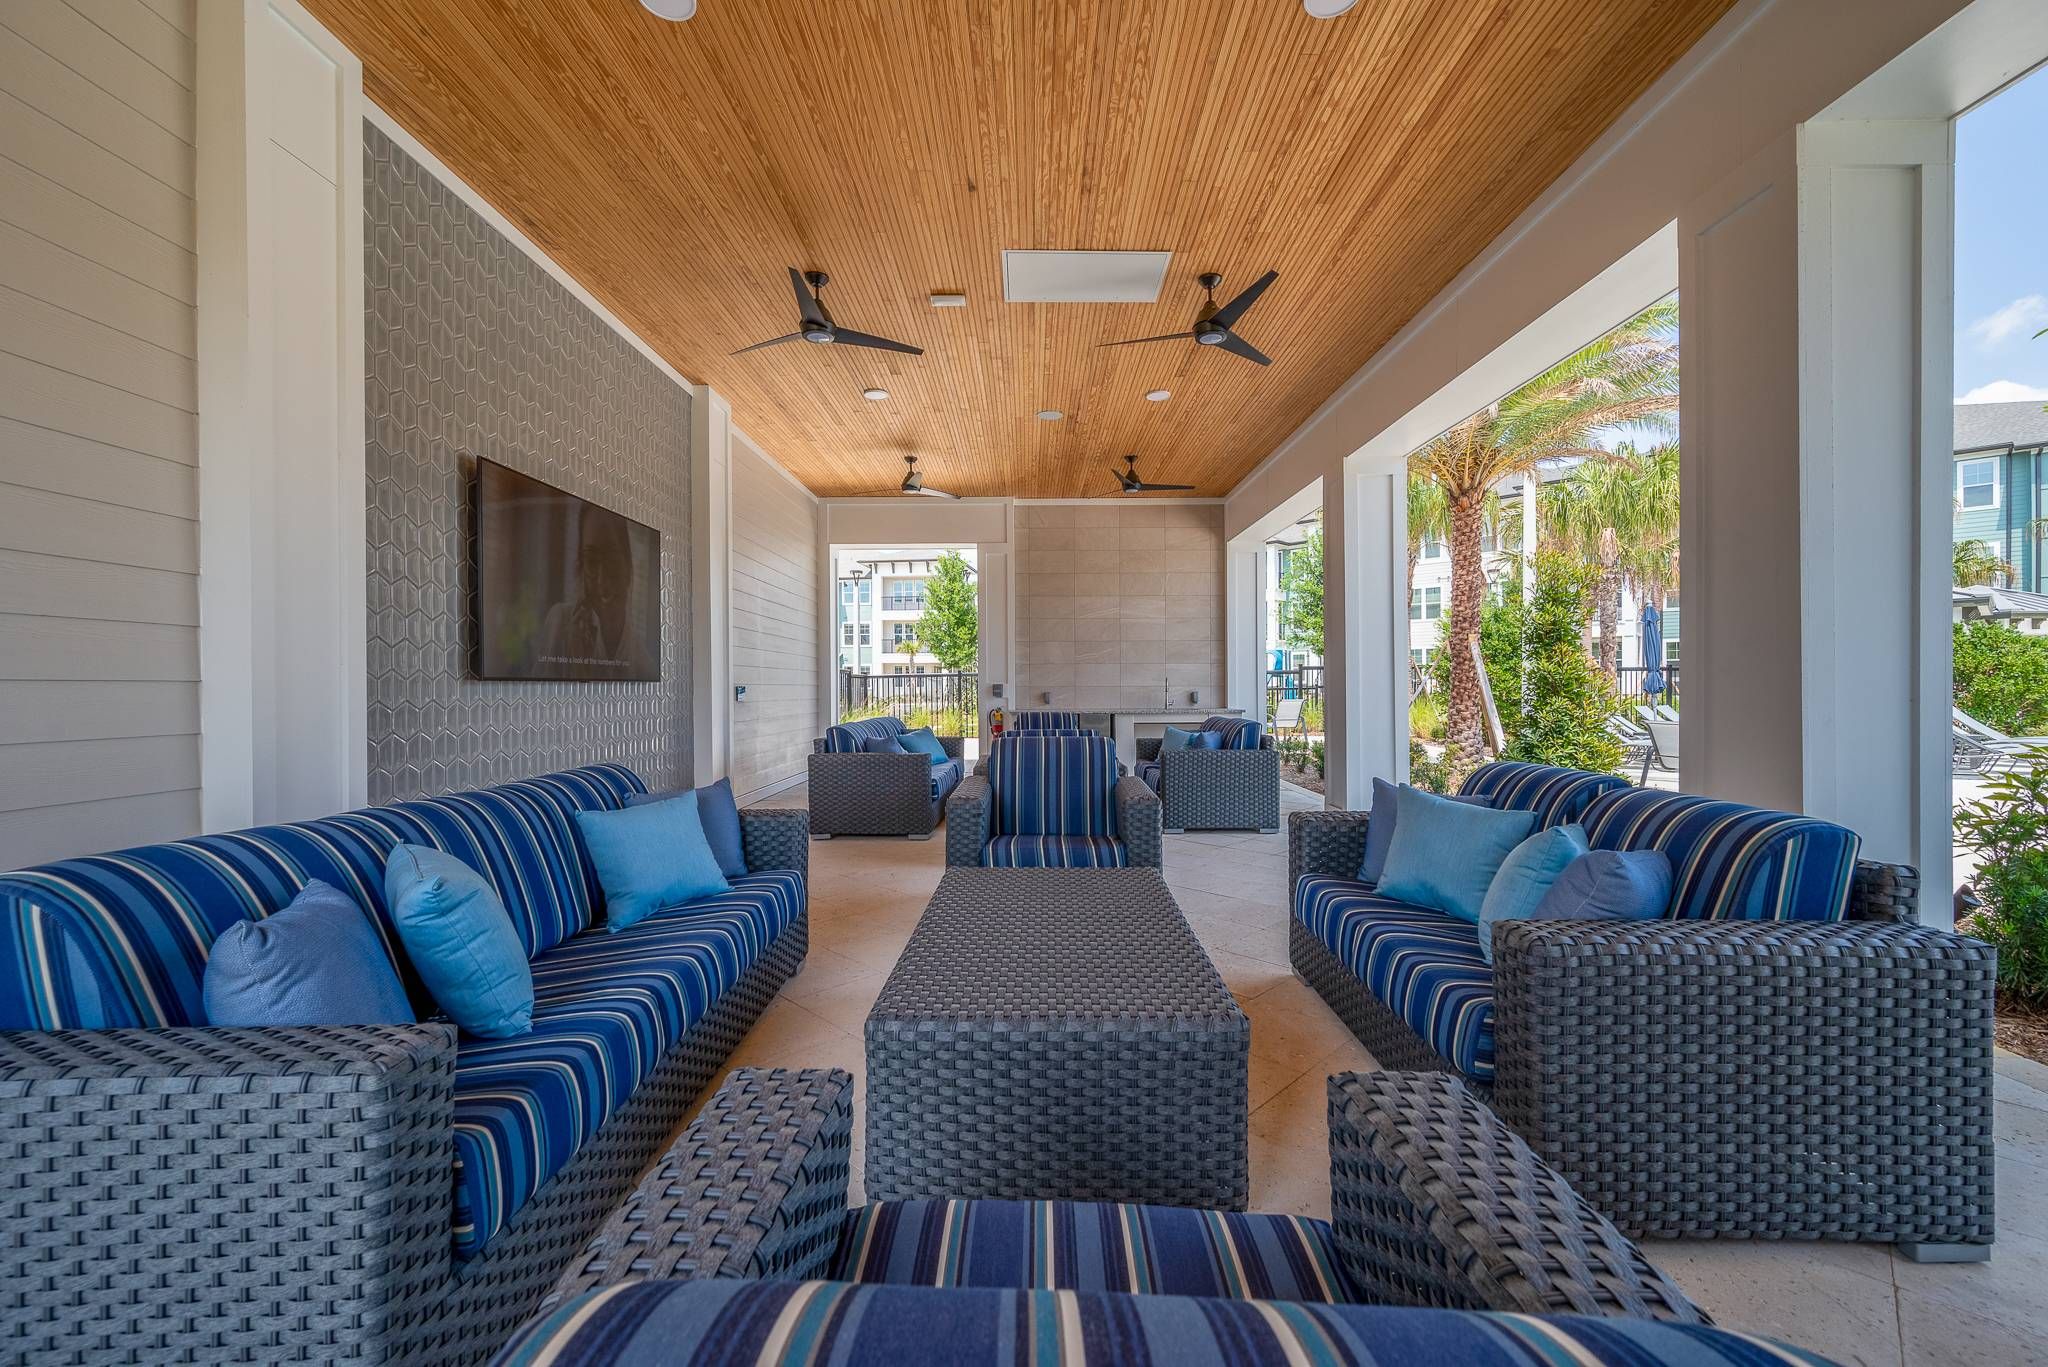 A spacious covered outdoor lounge featuring striped sofas and wicker furniture under a wood-paneled ceiling at Alta at Horizon West.